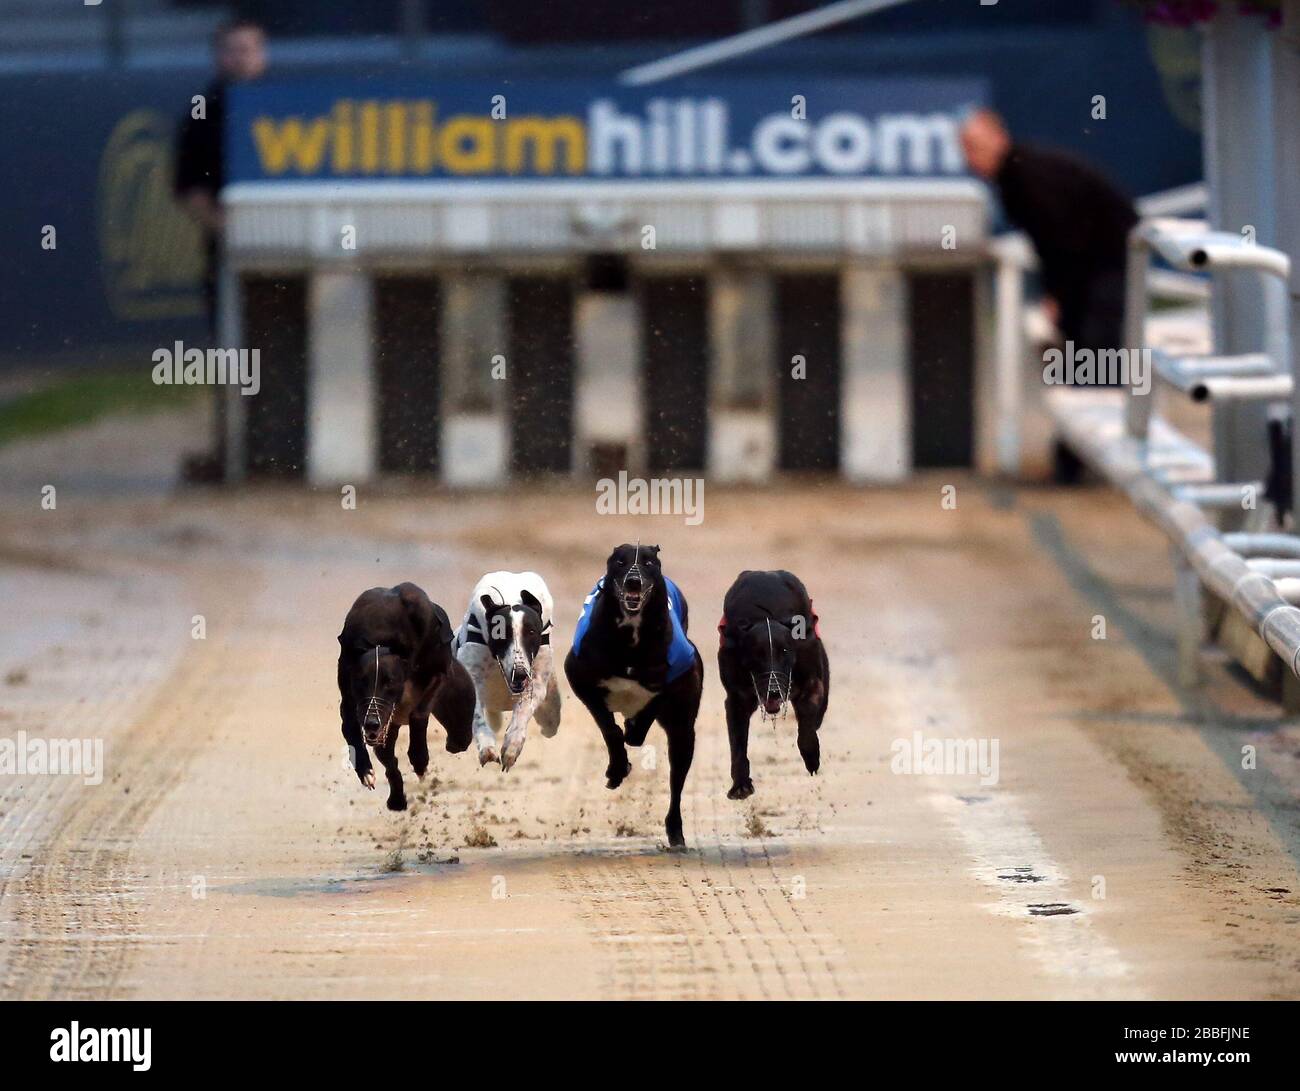 Holborn Junior (no.4 black), Fire Height Spec (no.3 white), Knockglass Billy (no.2 blue) and Money Talks (no.1 red) in action during the William Hill Greyhound Derby 2nd Round Heat 13 Stock Photo